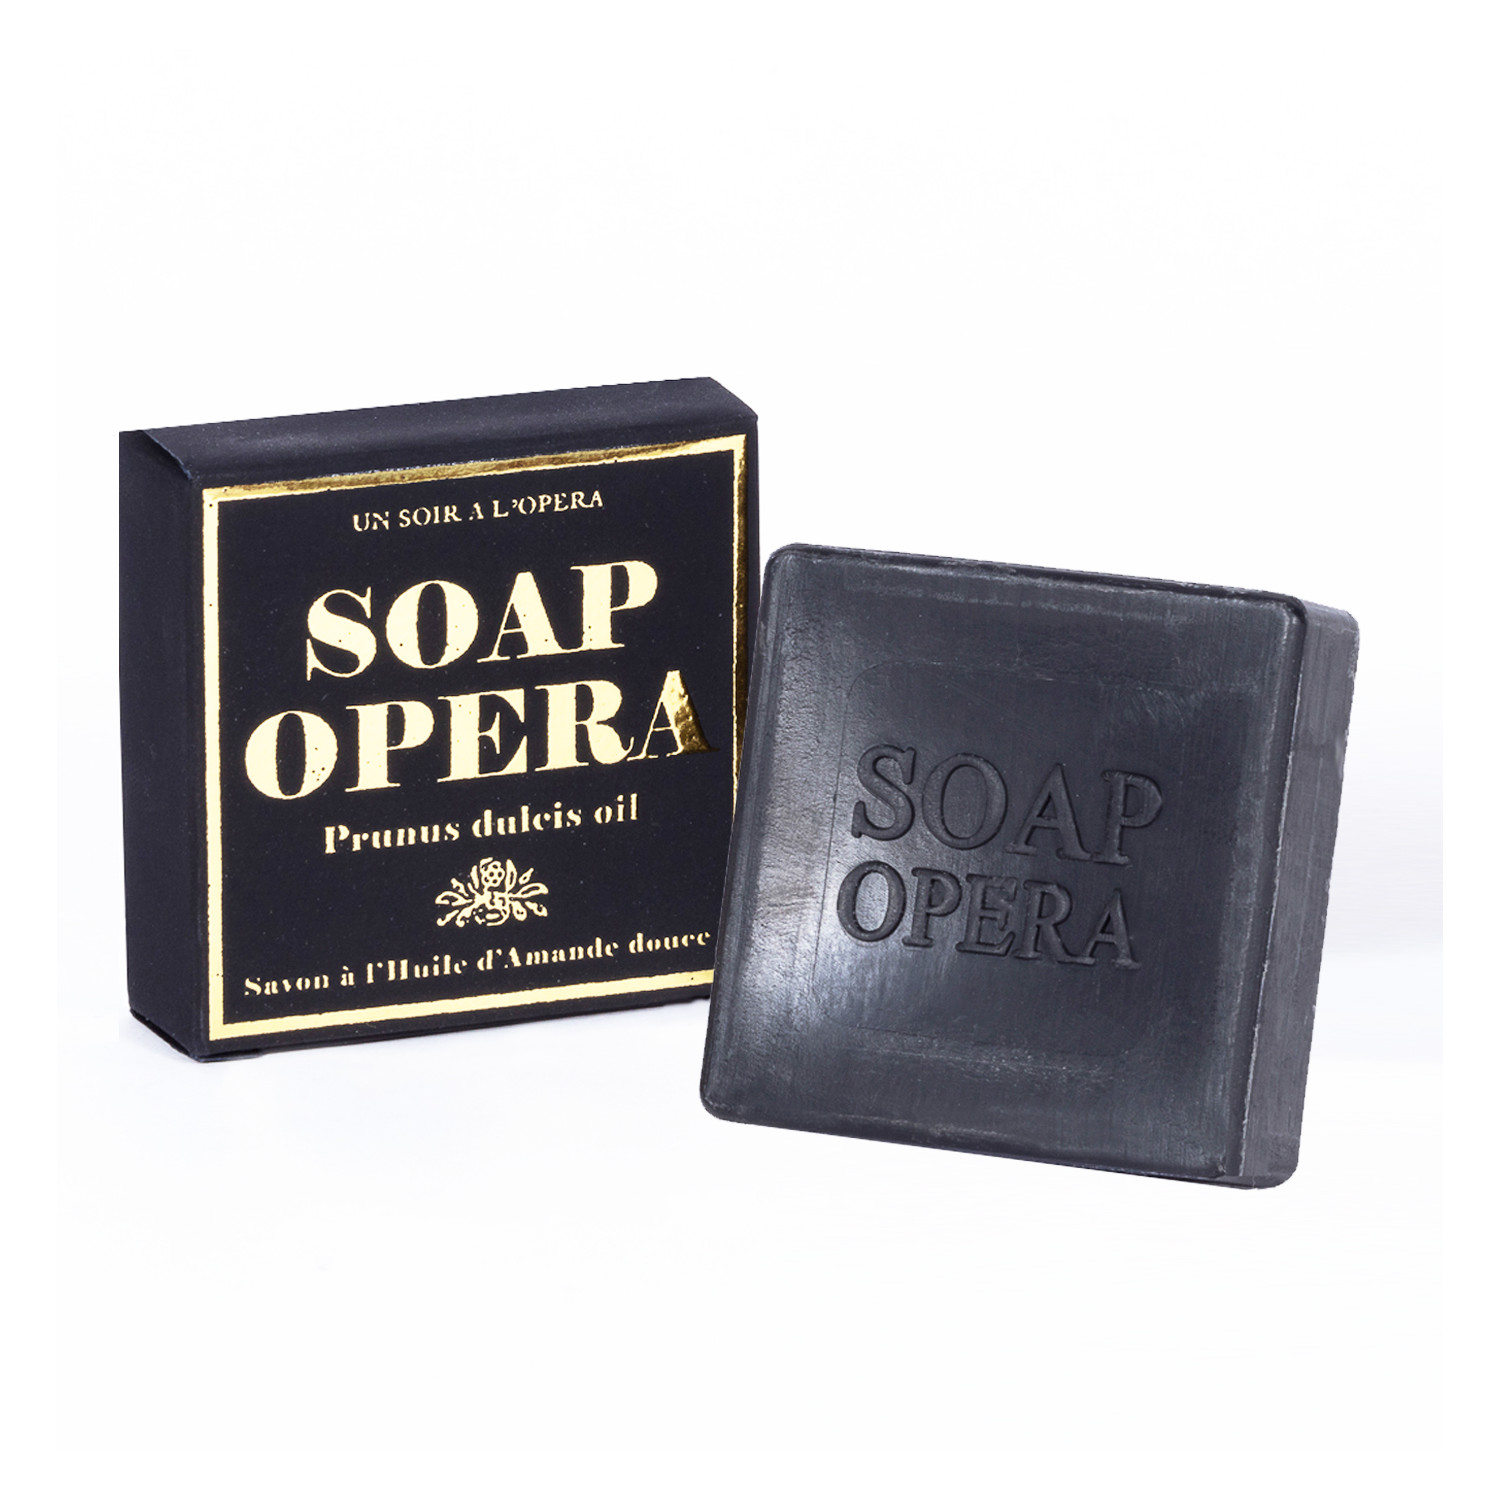 SOAP OPERA - Hand soap - Sandalwood and Almond oil 